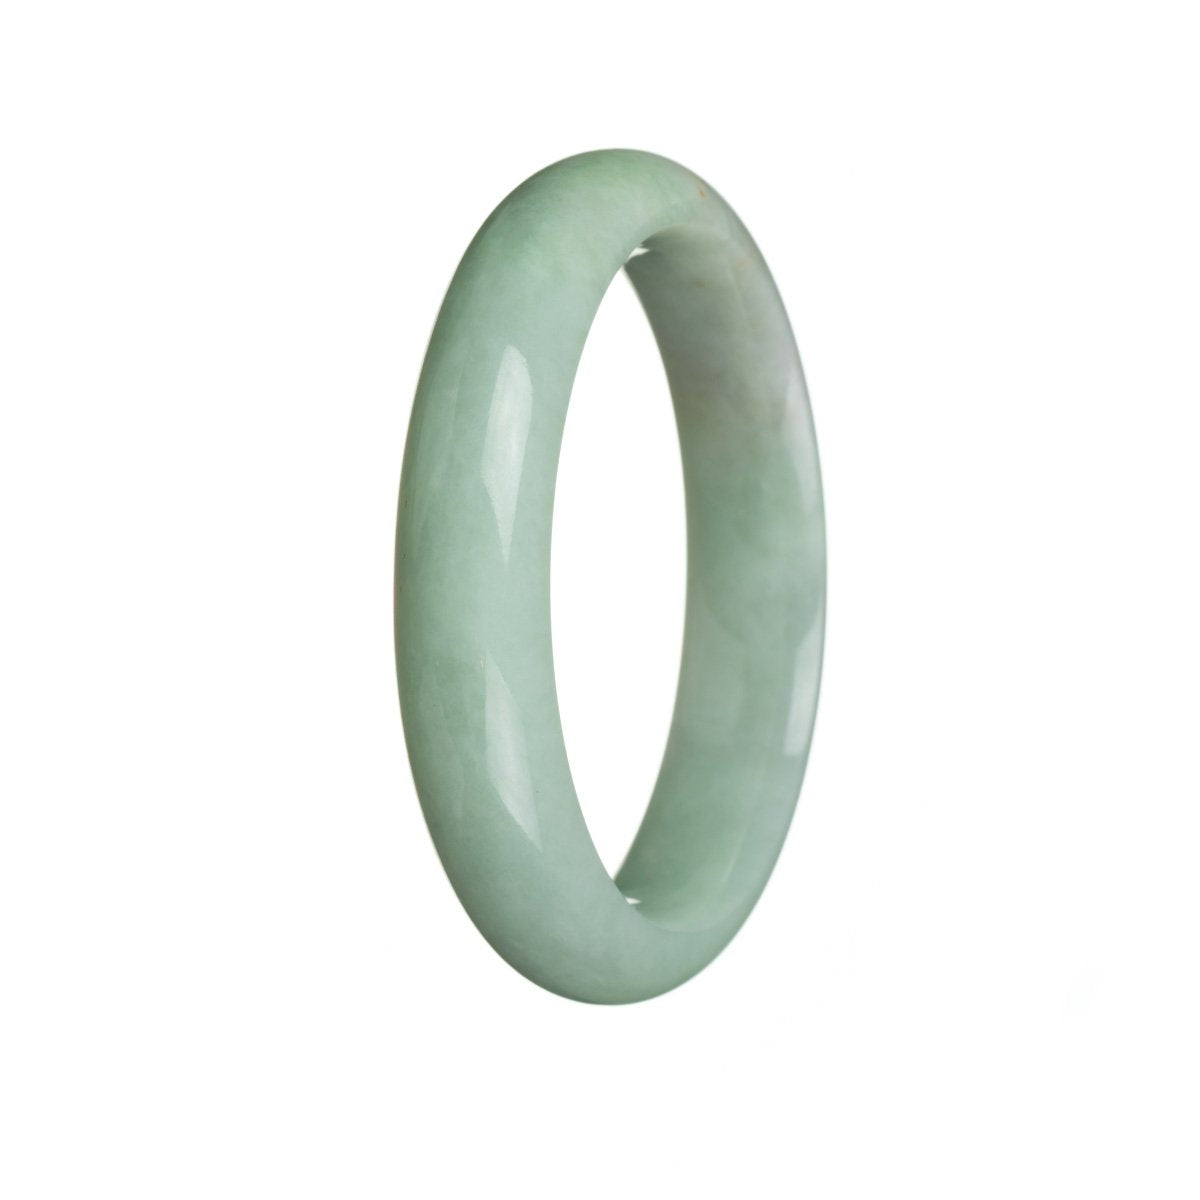 A close-up image of a green Burmese jade bangle bracelet with a semi-round shape, measuring 54mm in diameter. The bracelet exudes a genuine and natural beauty, showcasing the unique characteristics of the jade stone. Crafted with precision, this piece from MAYS GEMS is a stunning accessory that adds elegance to any outfit.